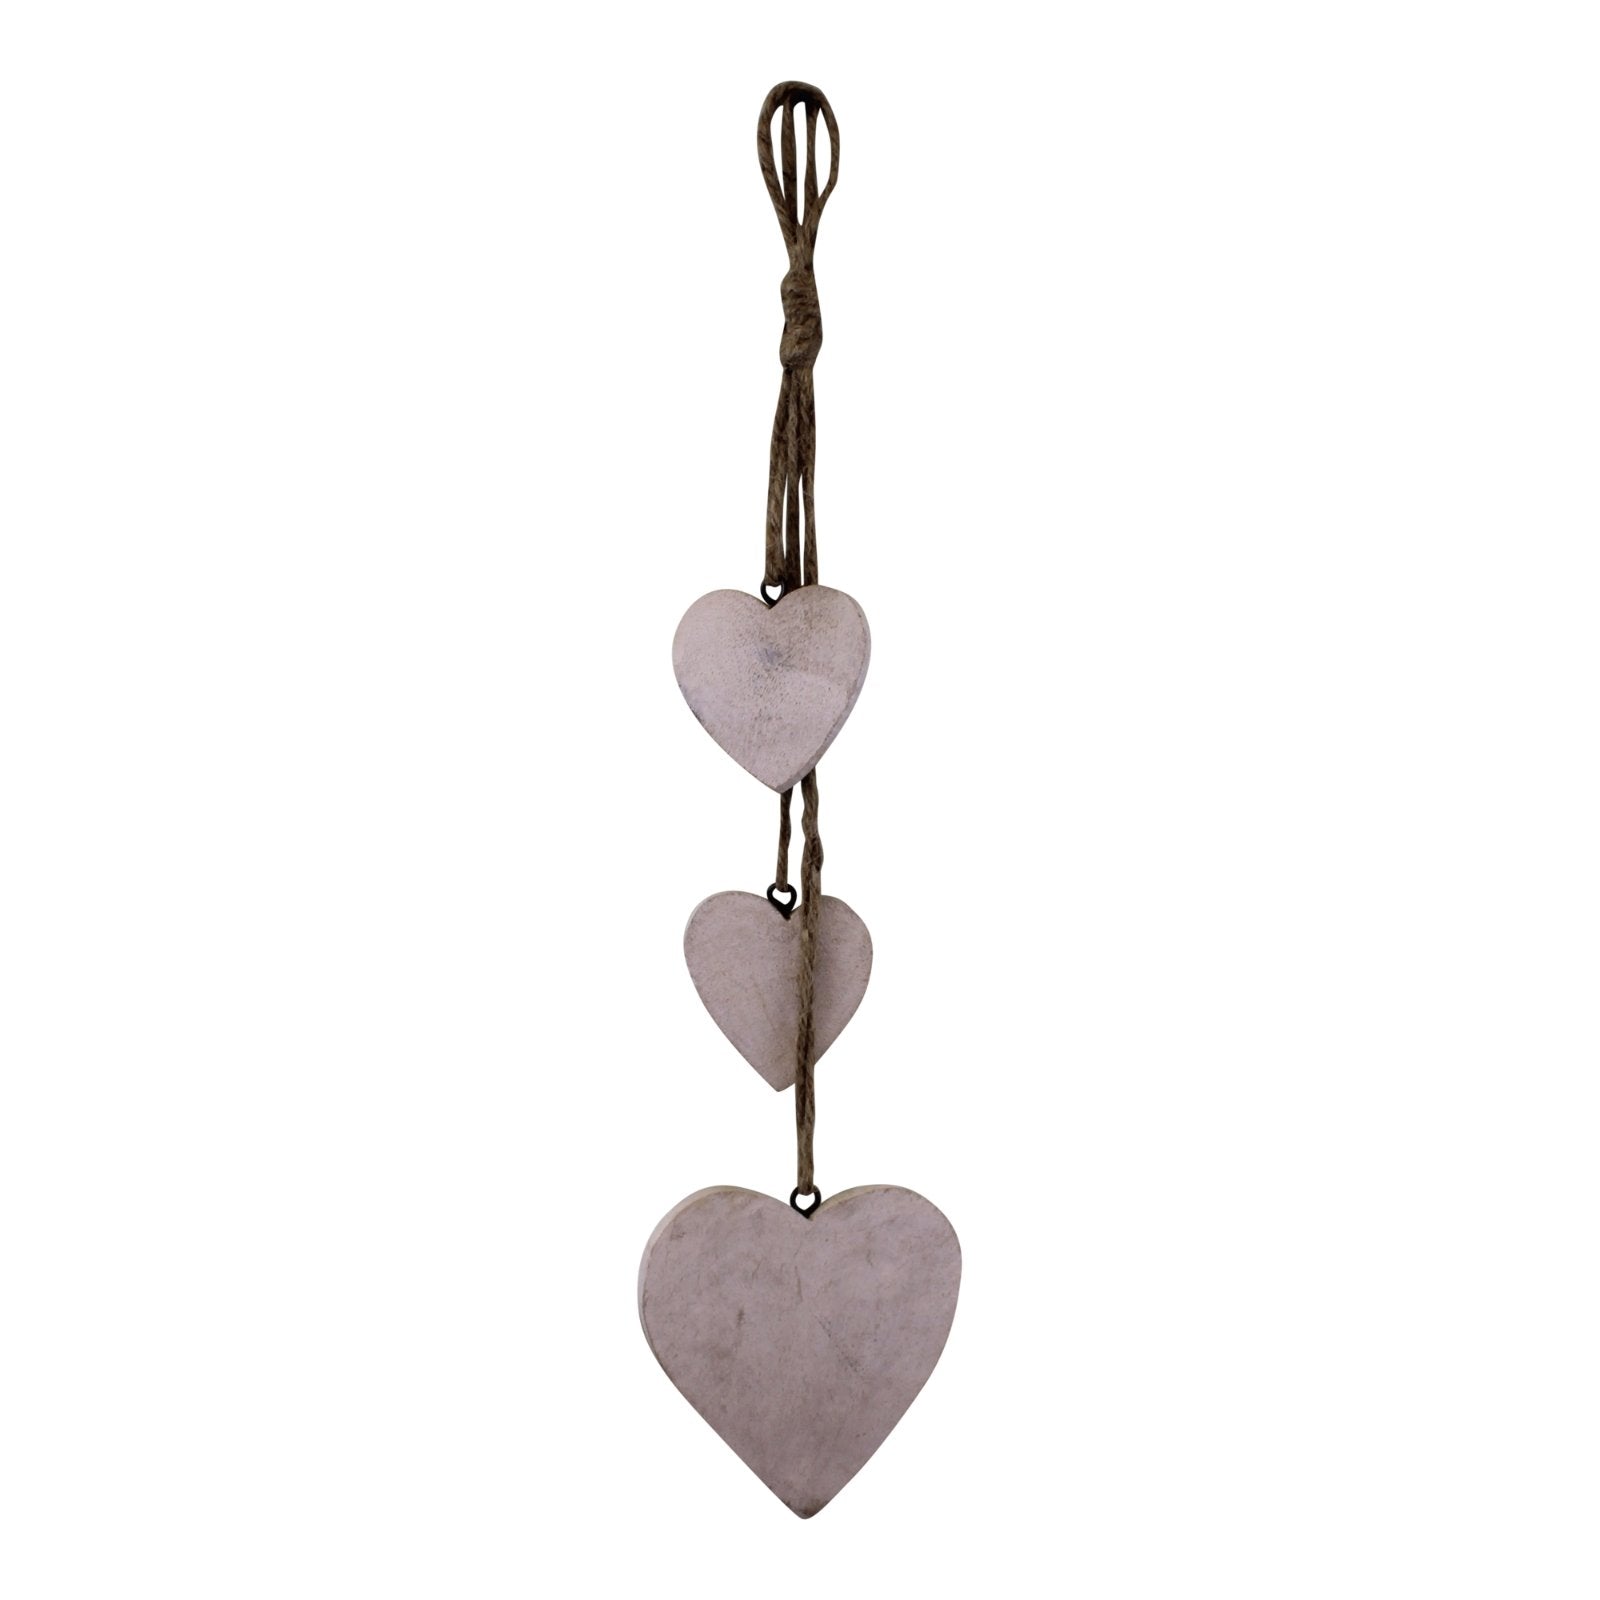 Image of Three Hanging Wooden Heart Decoration, Light Wood